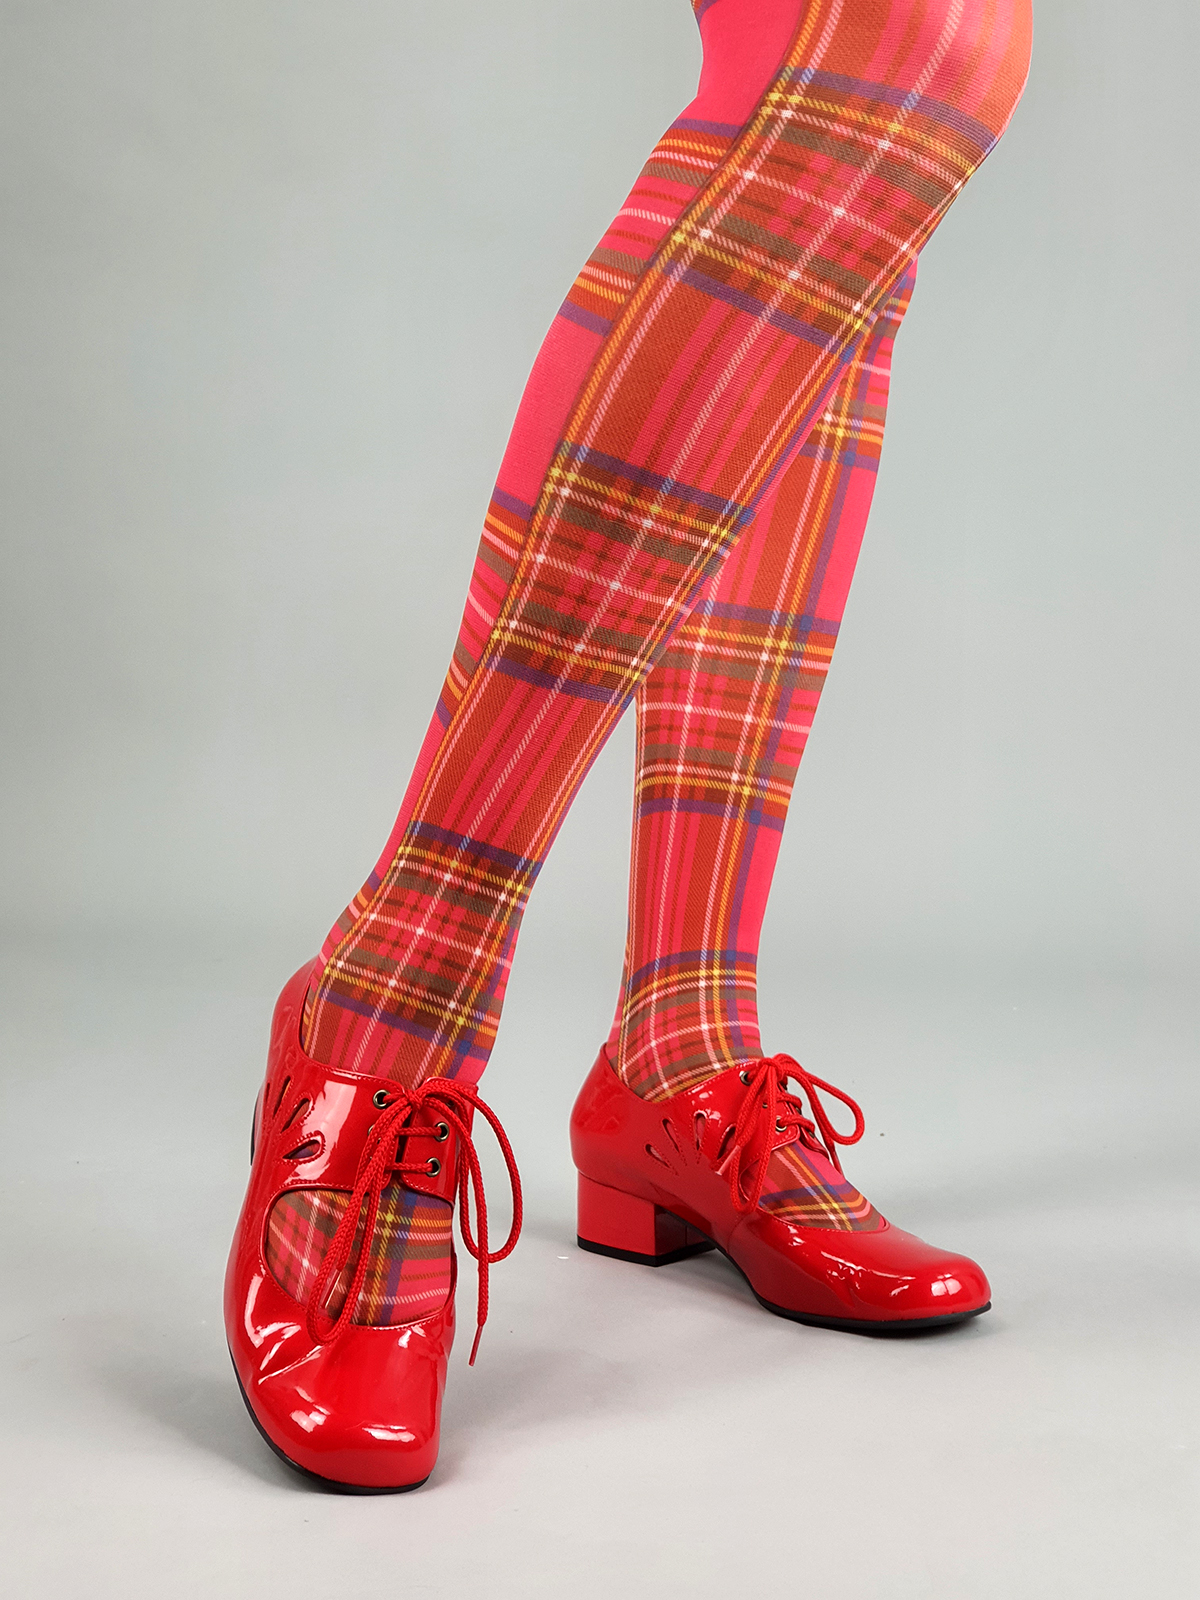 Red Tartan Tights – ladies vintage retro 60s – 70s style – Mod Shoes